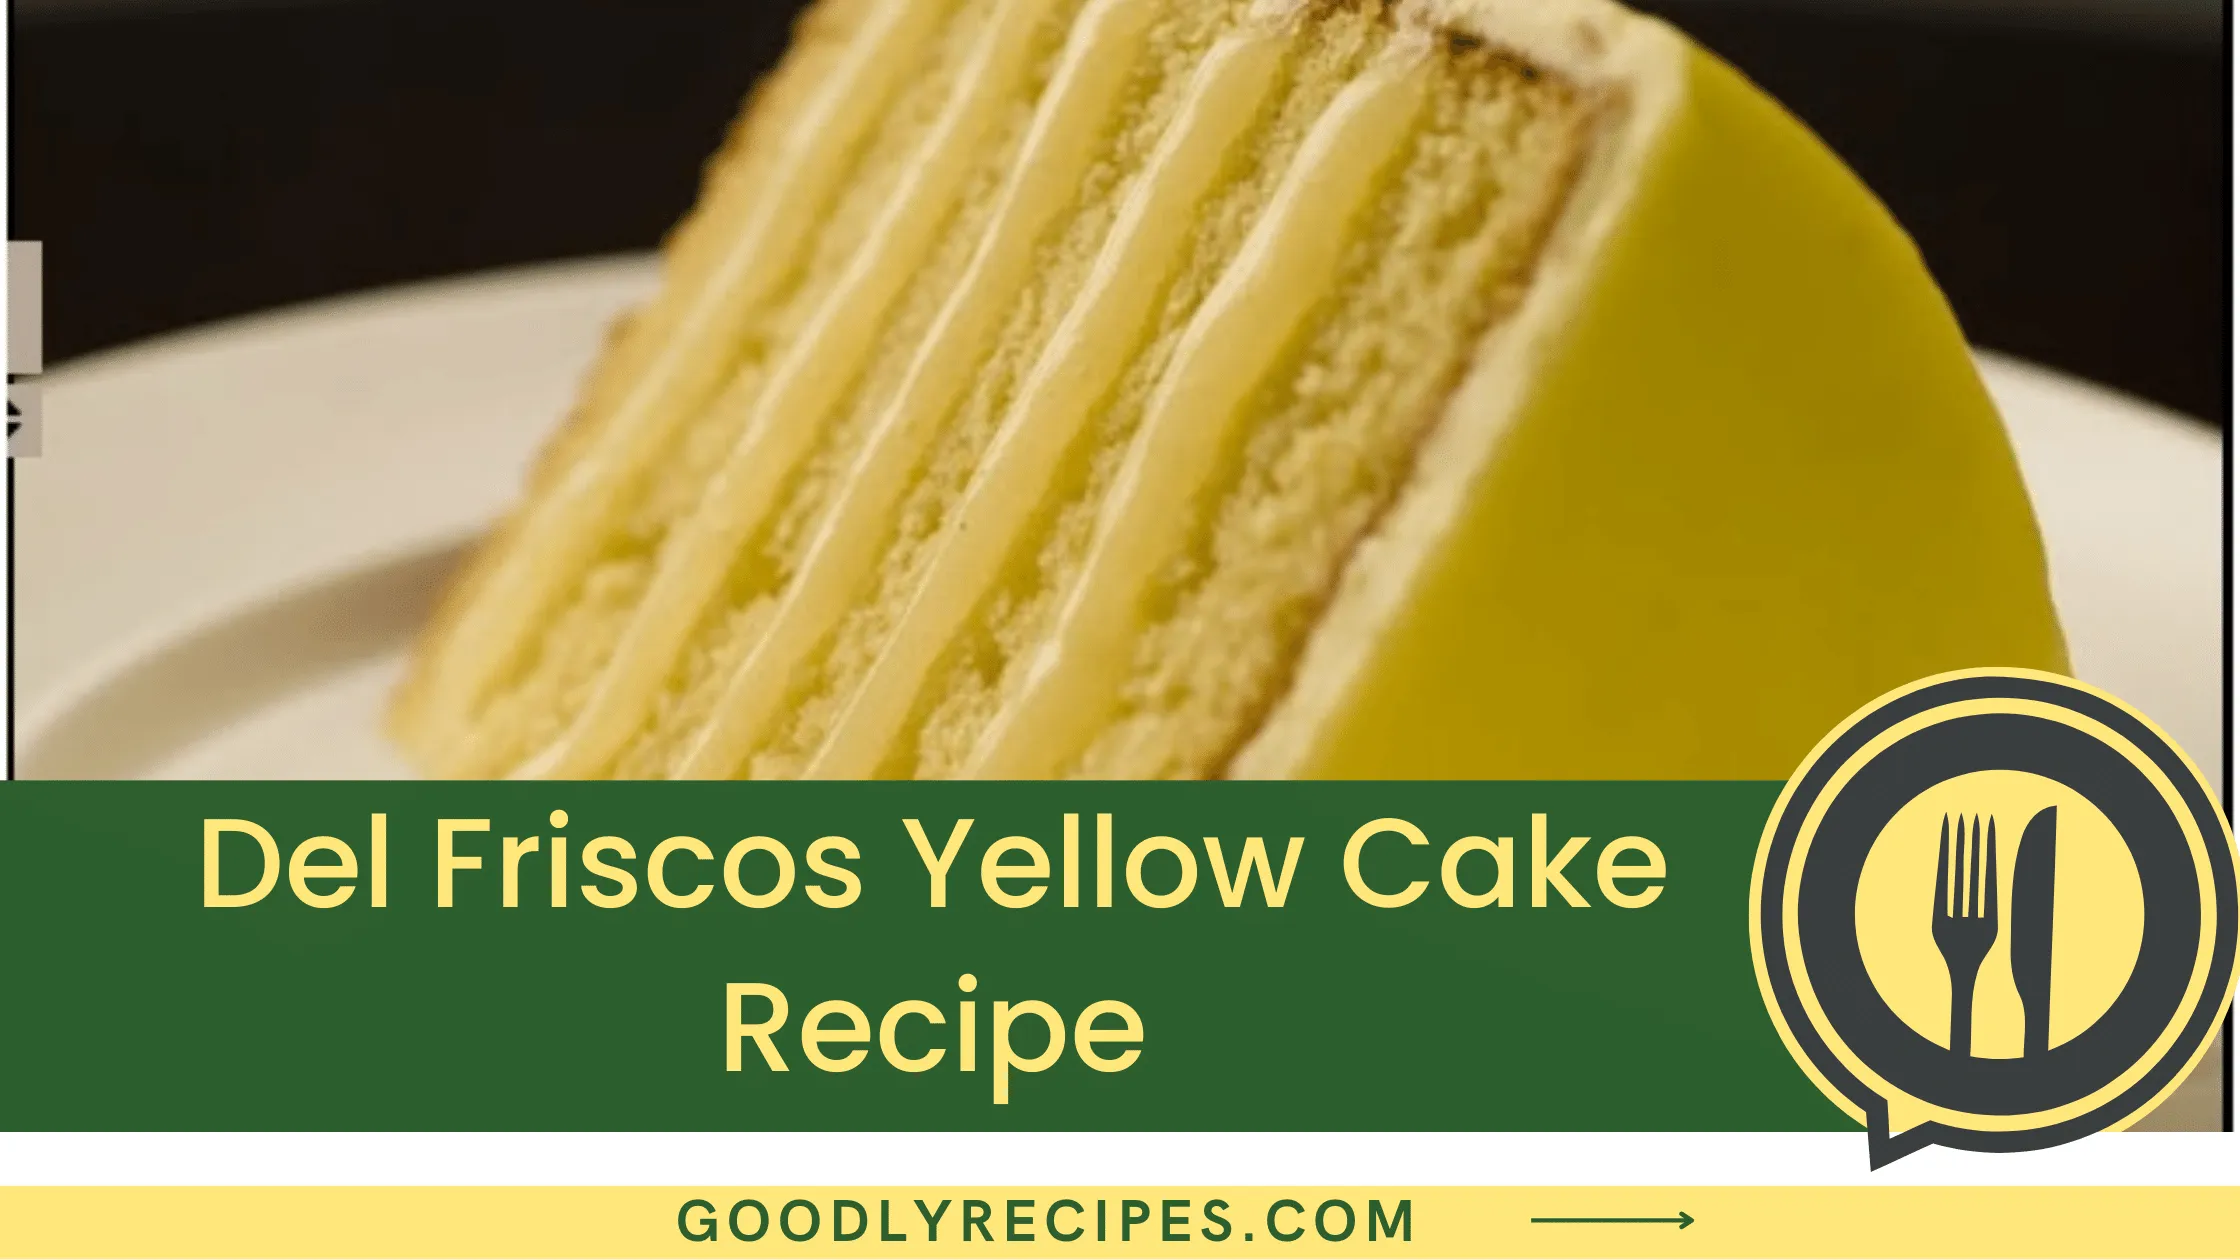 Del Frisco's Yellow Cake Recipe - For Food Lovers